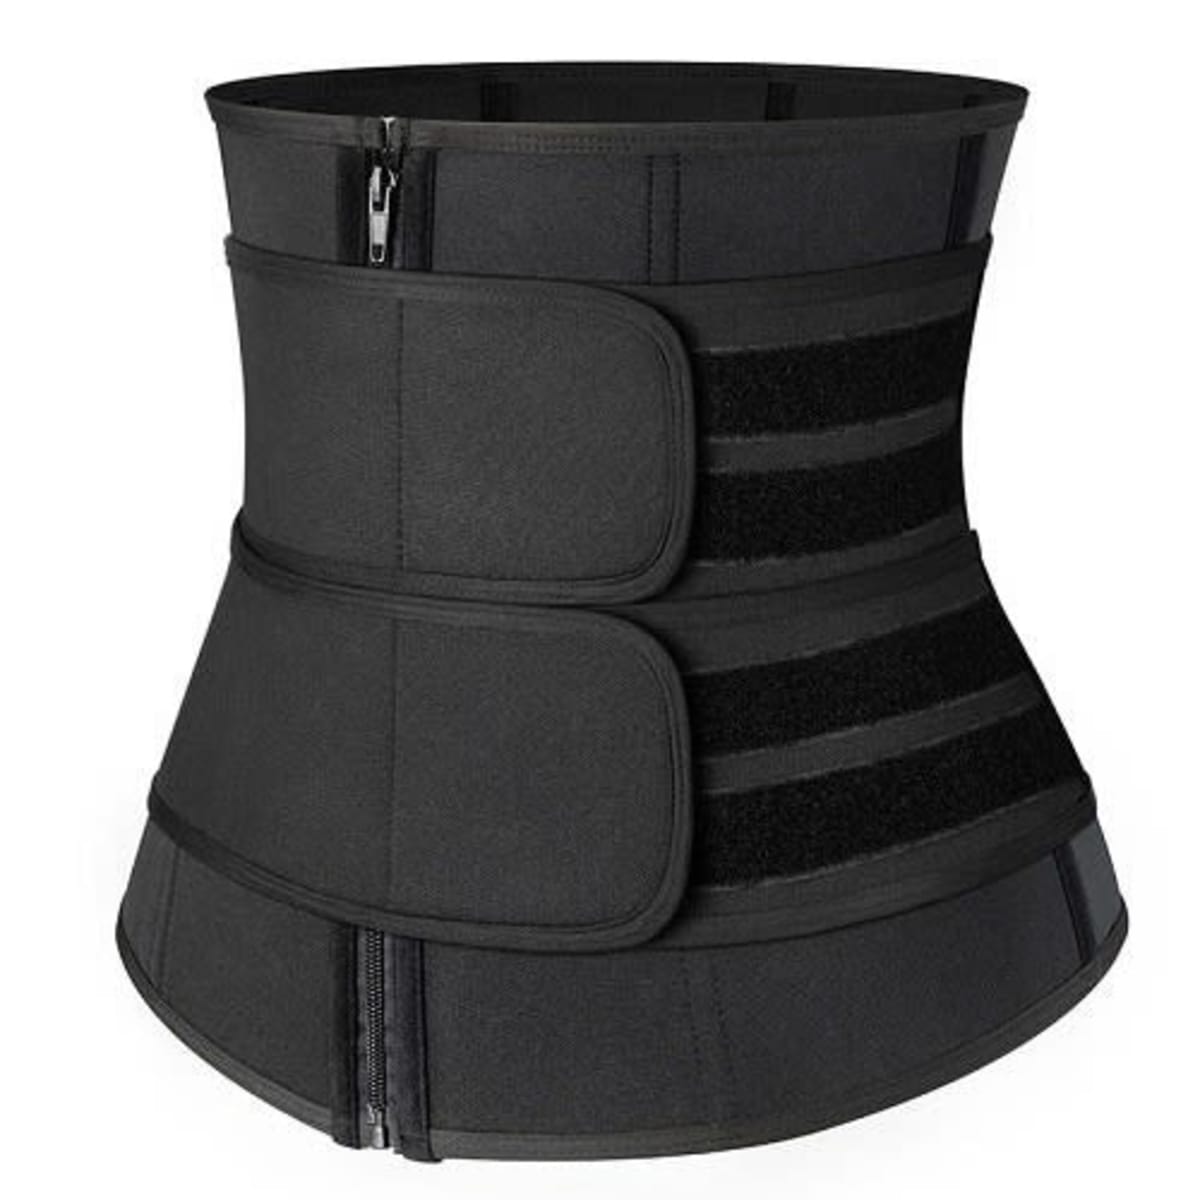 Waist Trainer Corset And Trimmer - Black